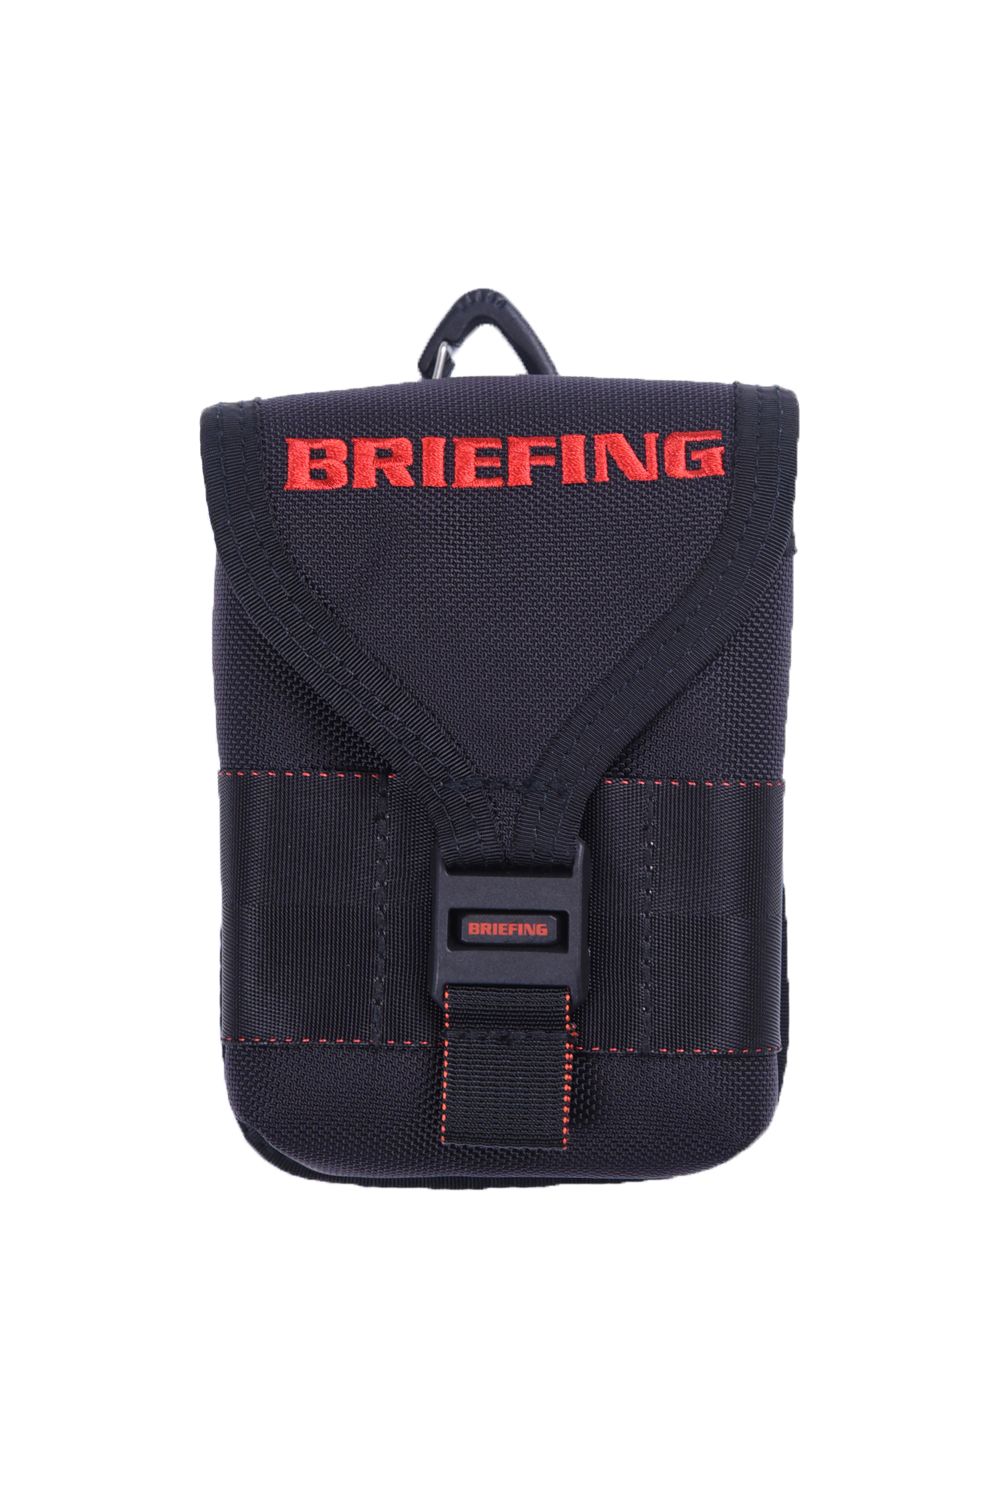 BRIEFING - 【1680Dエアバリスティックナイロン】 SCOPE BOX POUCH ...